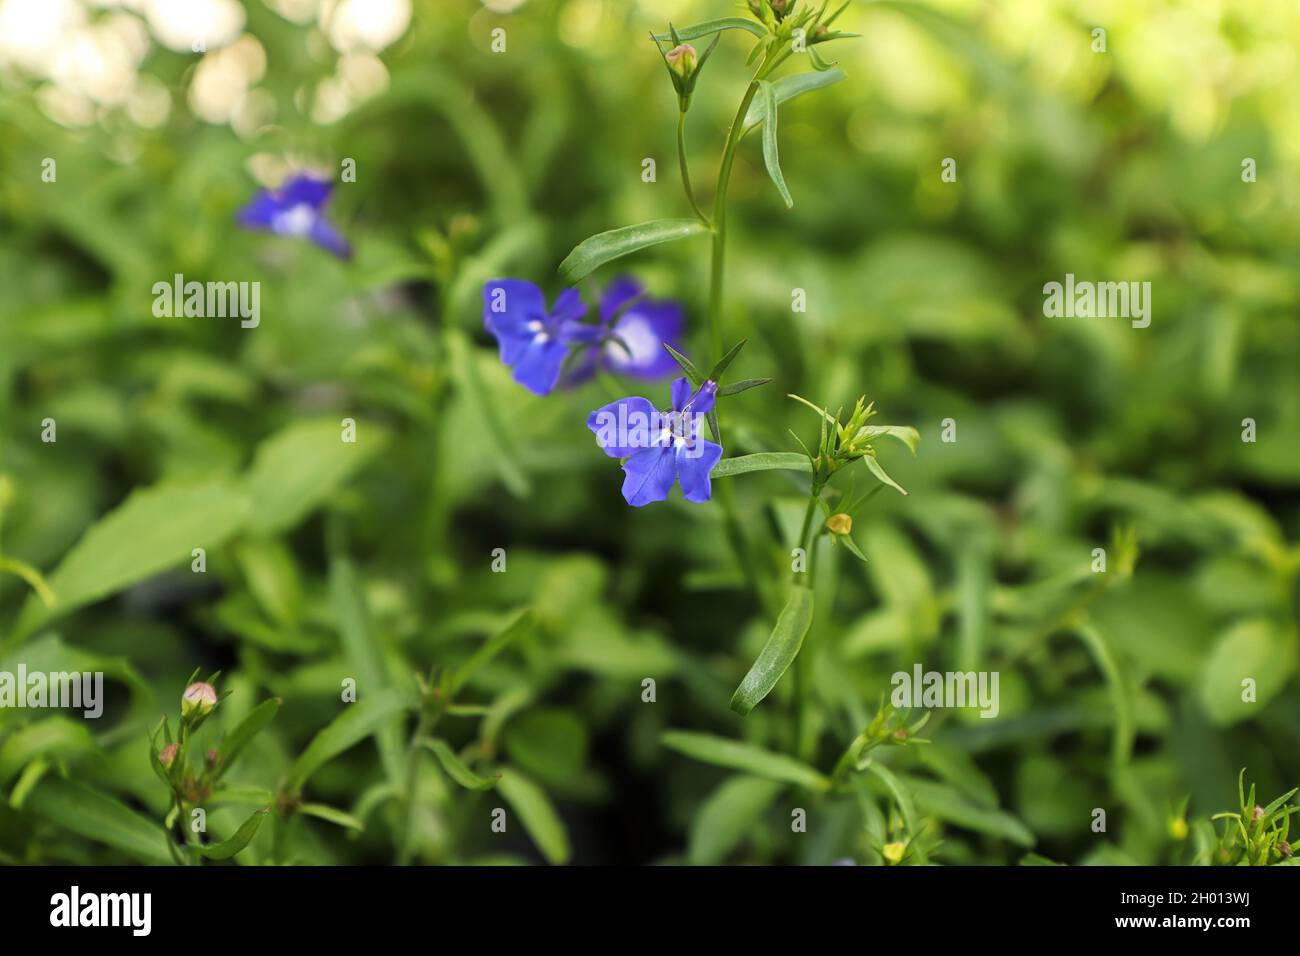 Tiny purple Indian Tobacco flowers blooming in spring Stock Photo